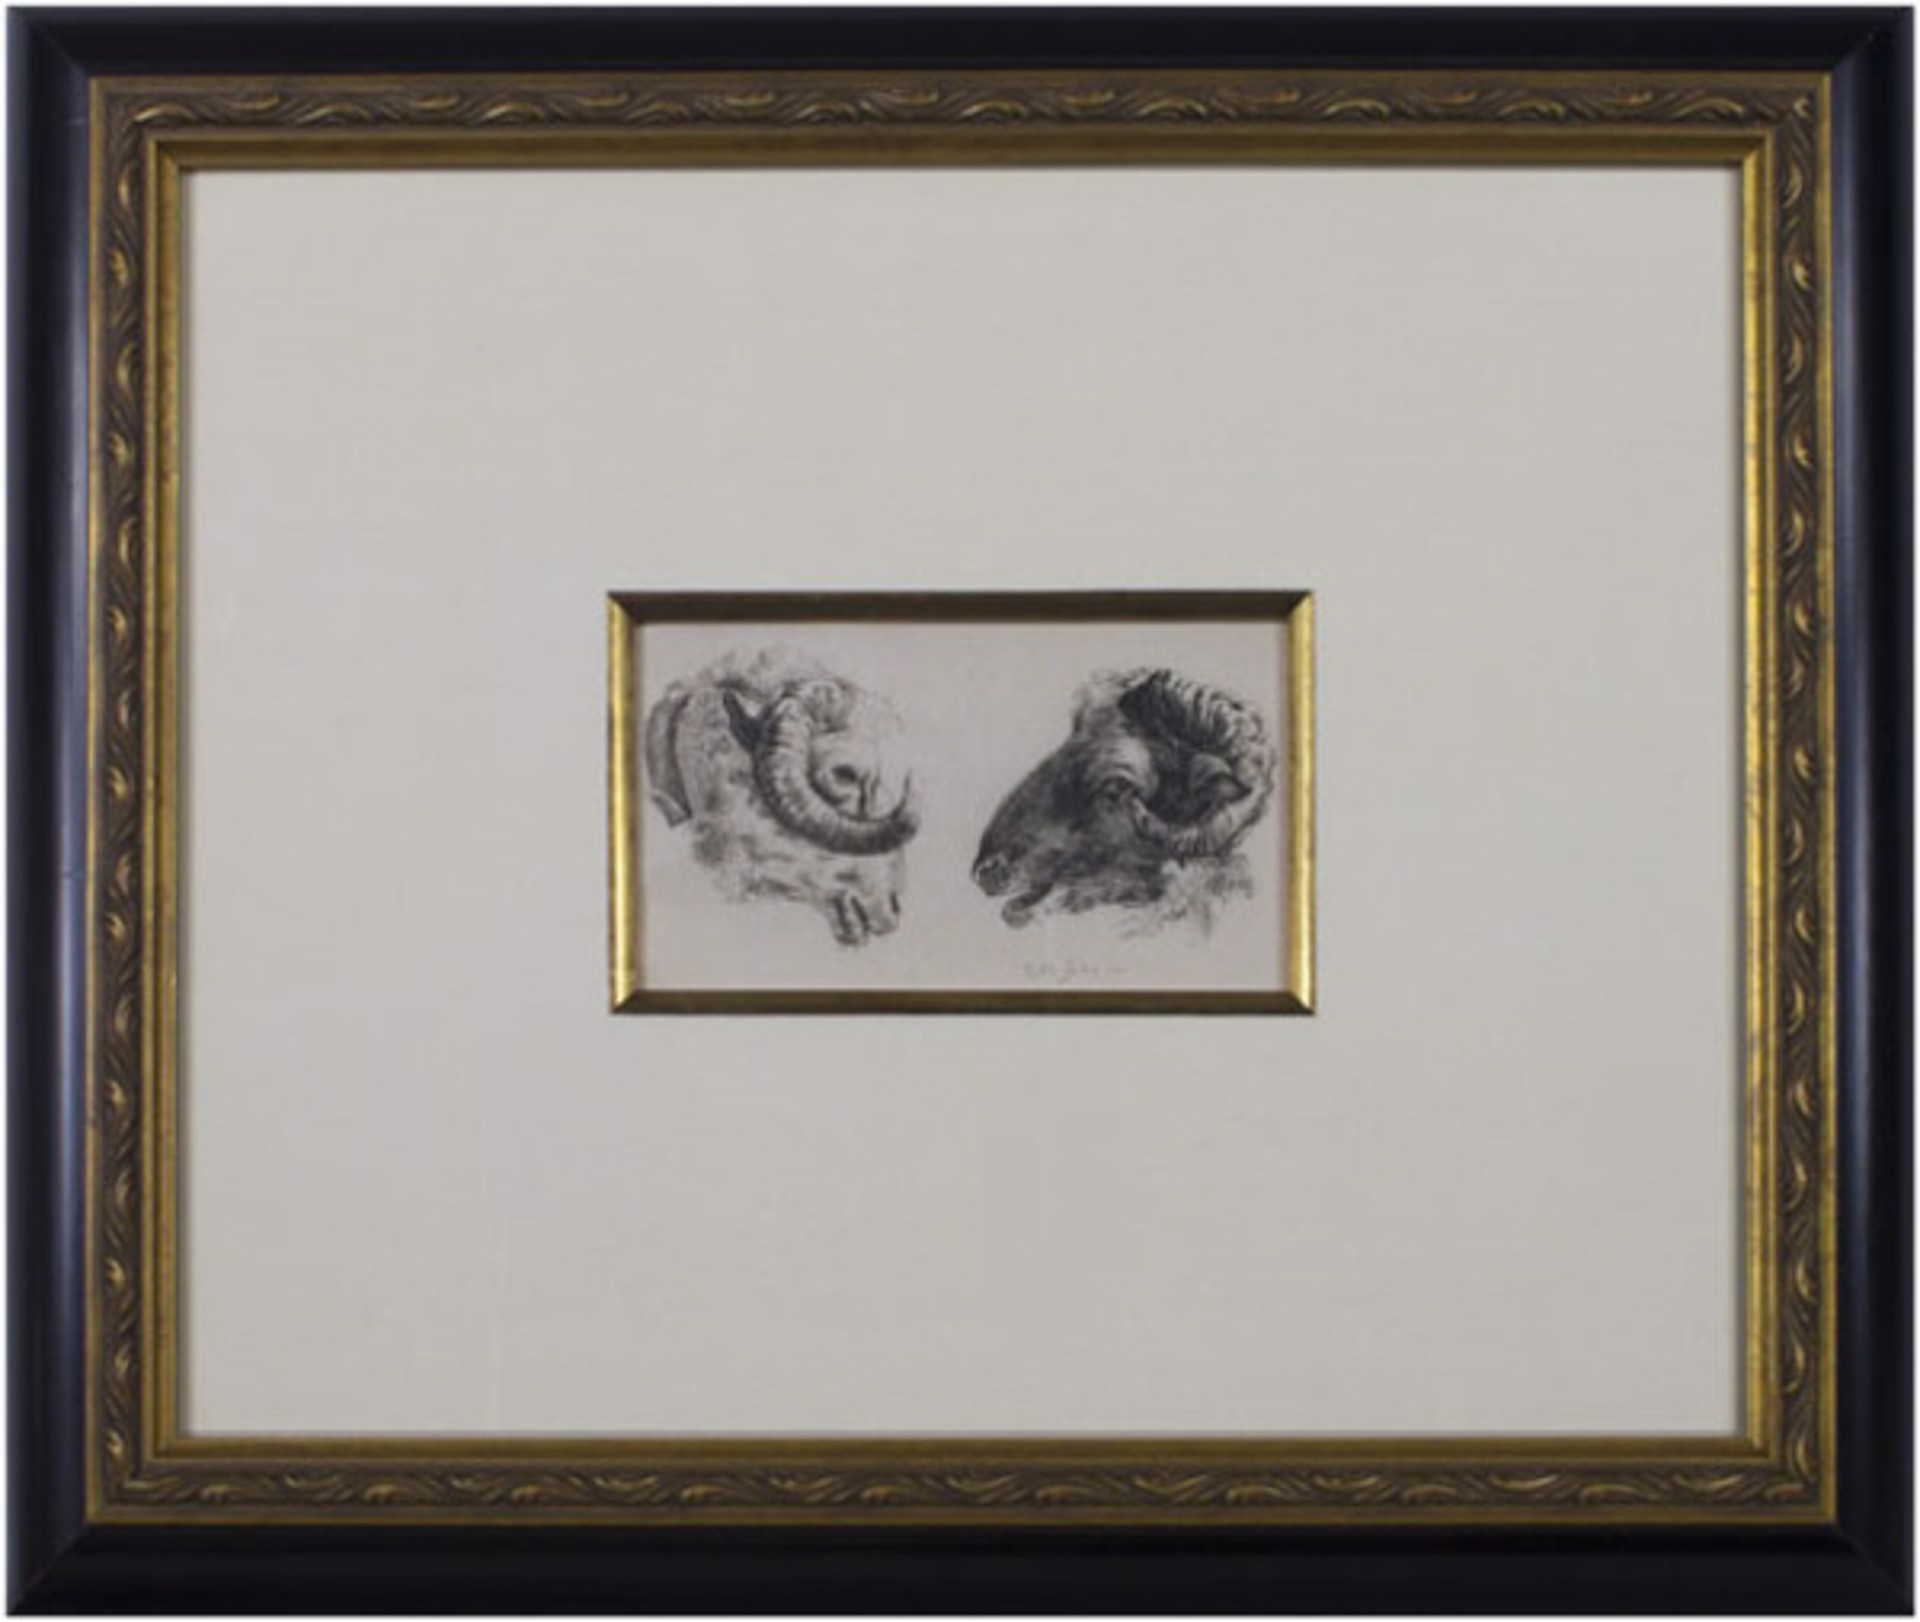 Two Rams Facing Each Other by Karel Du Jardin